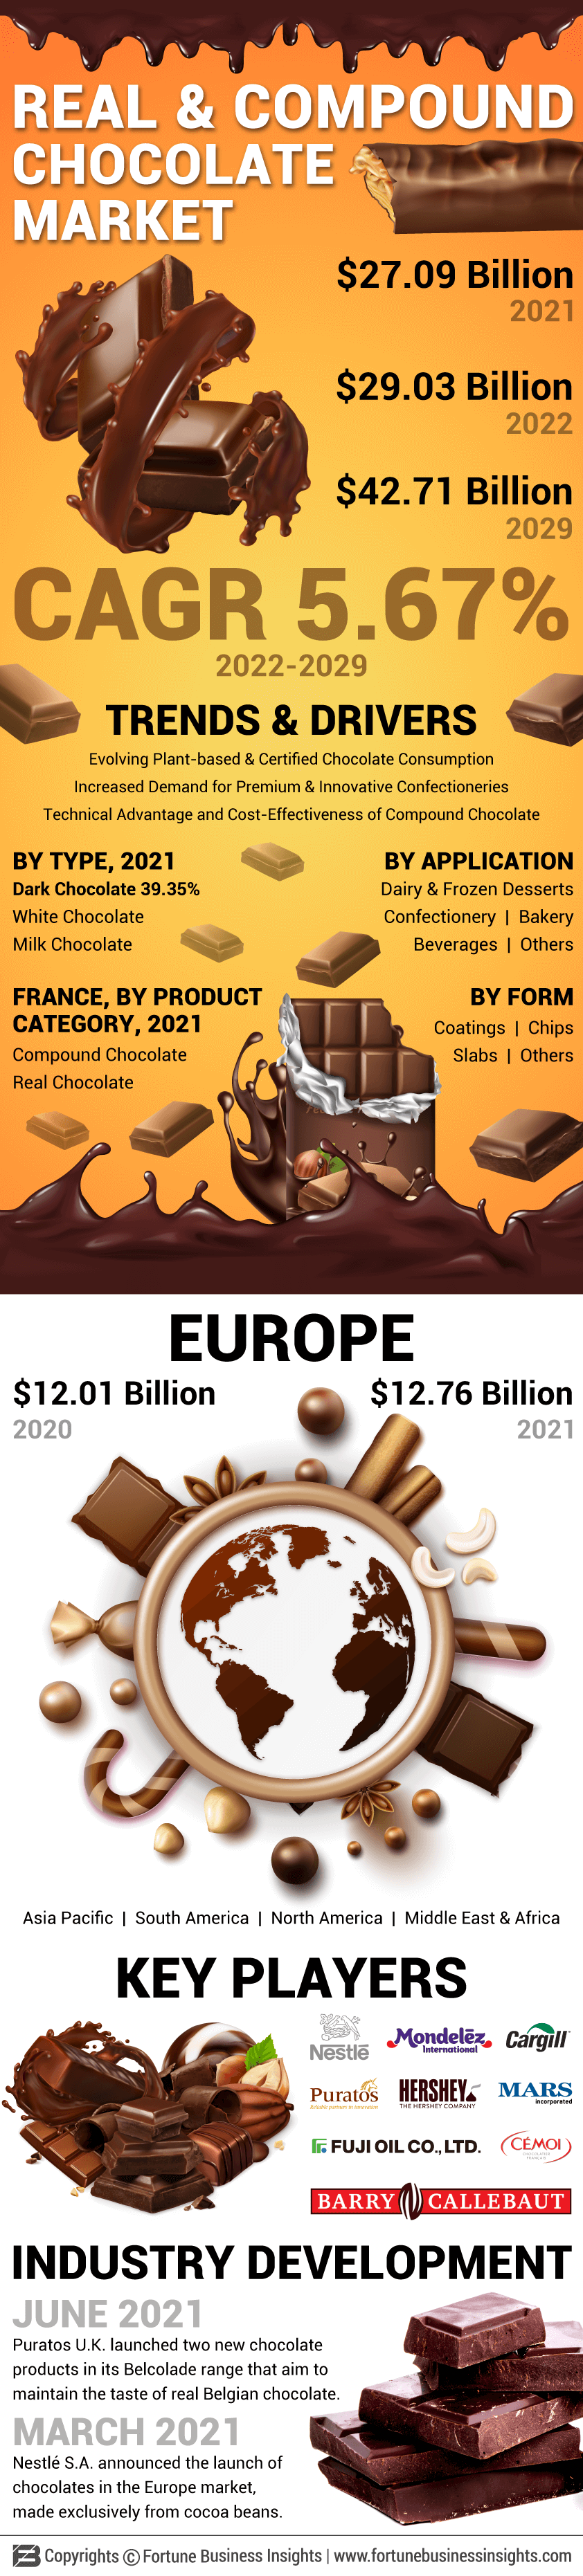 Real and Compound Chocolate Market